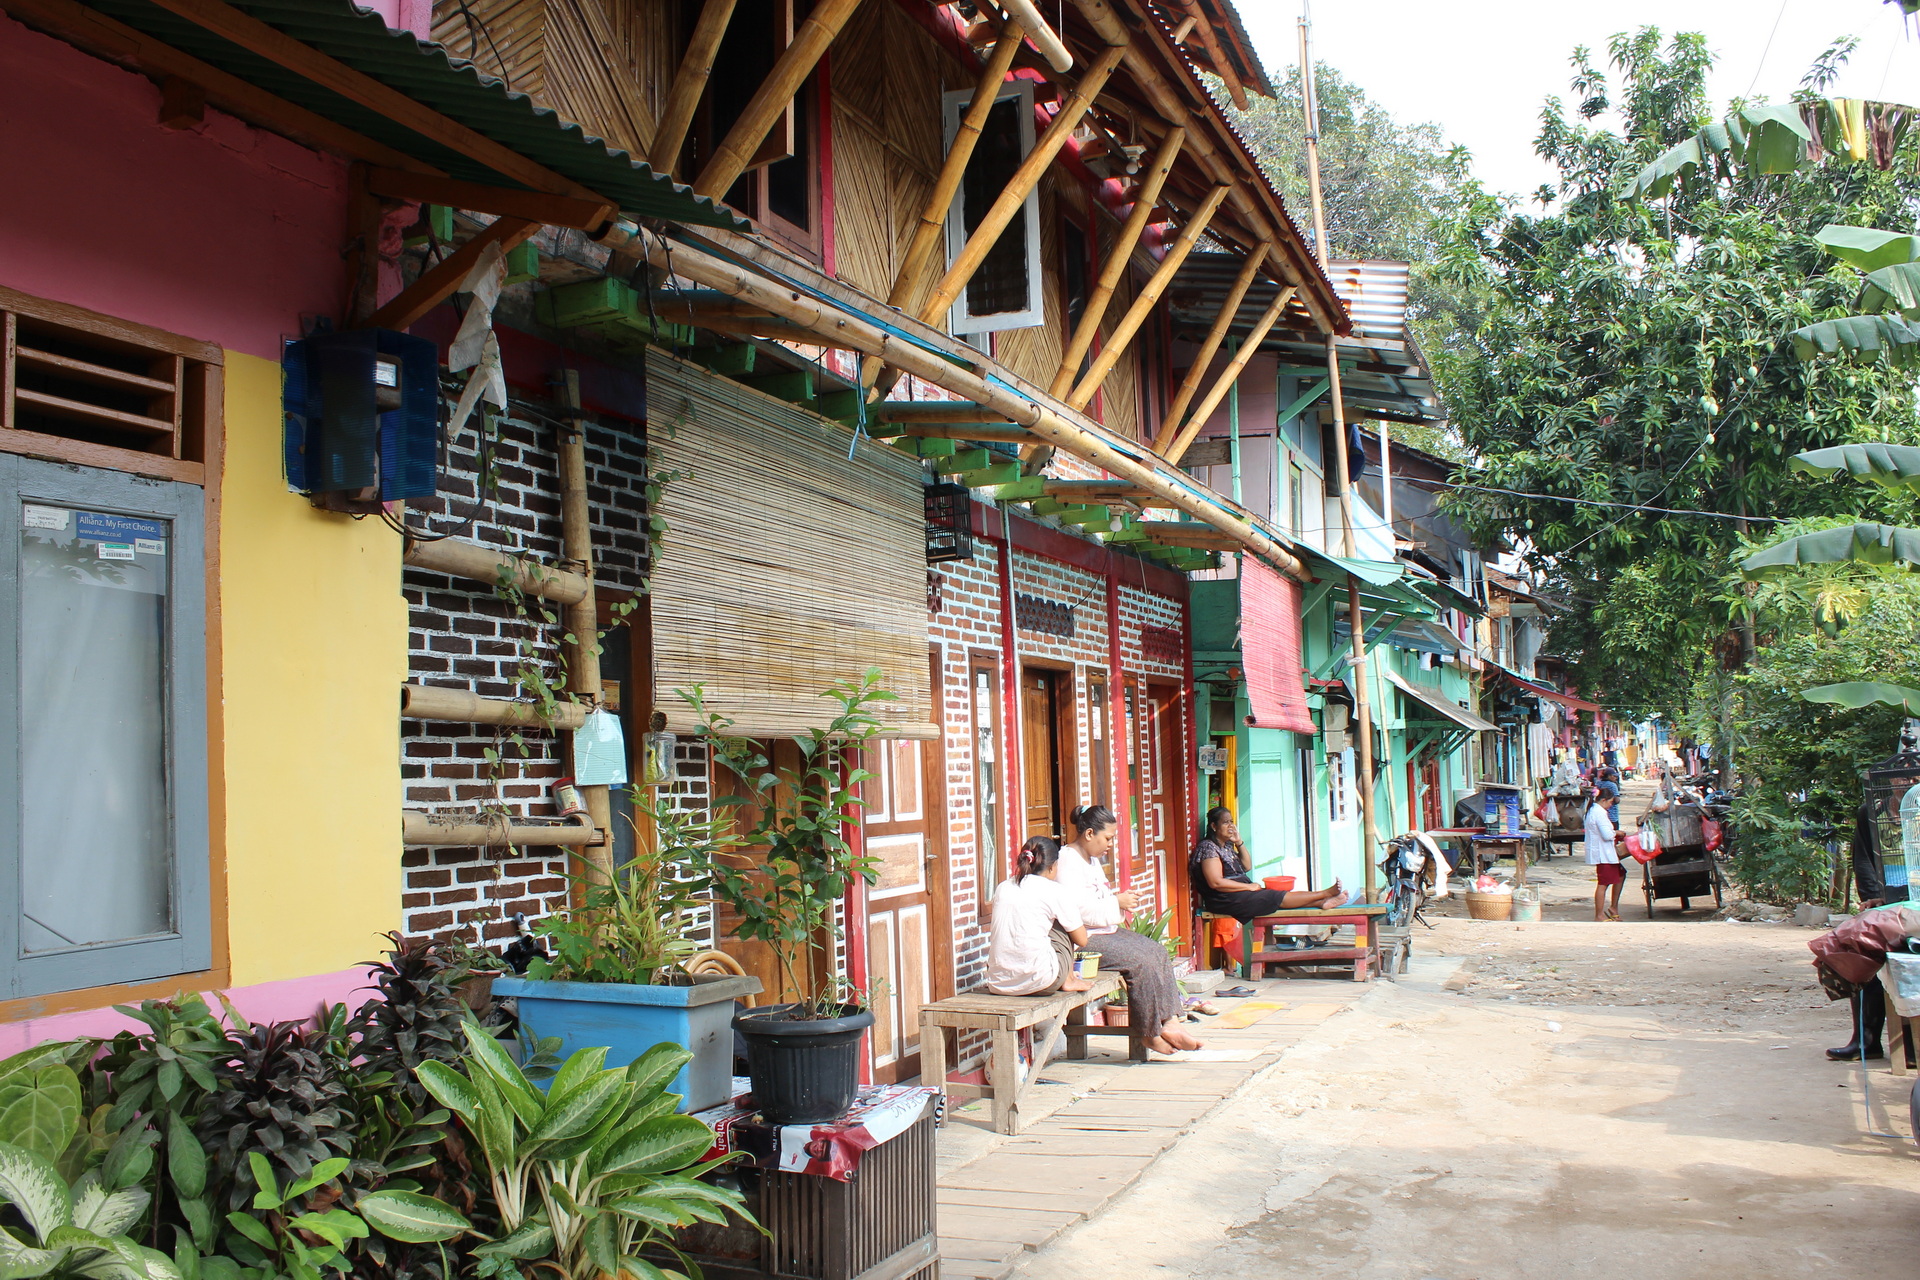 <p>Anak Kali CIliwung Kampung Improvement is an on-site settlement upgrading project as a response to a possible threat of eviction by the local government, through citizen advocacy, community organization, architecture and urban design.</p><p><br></p>